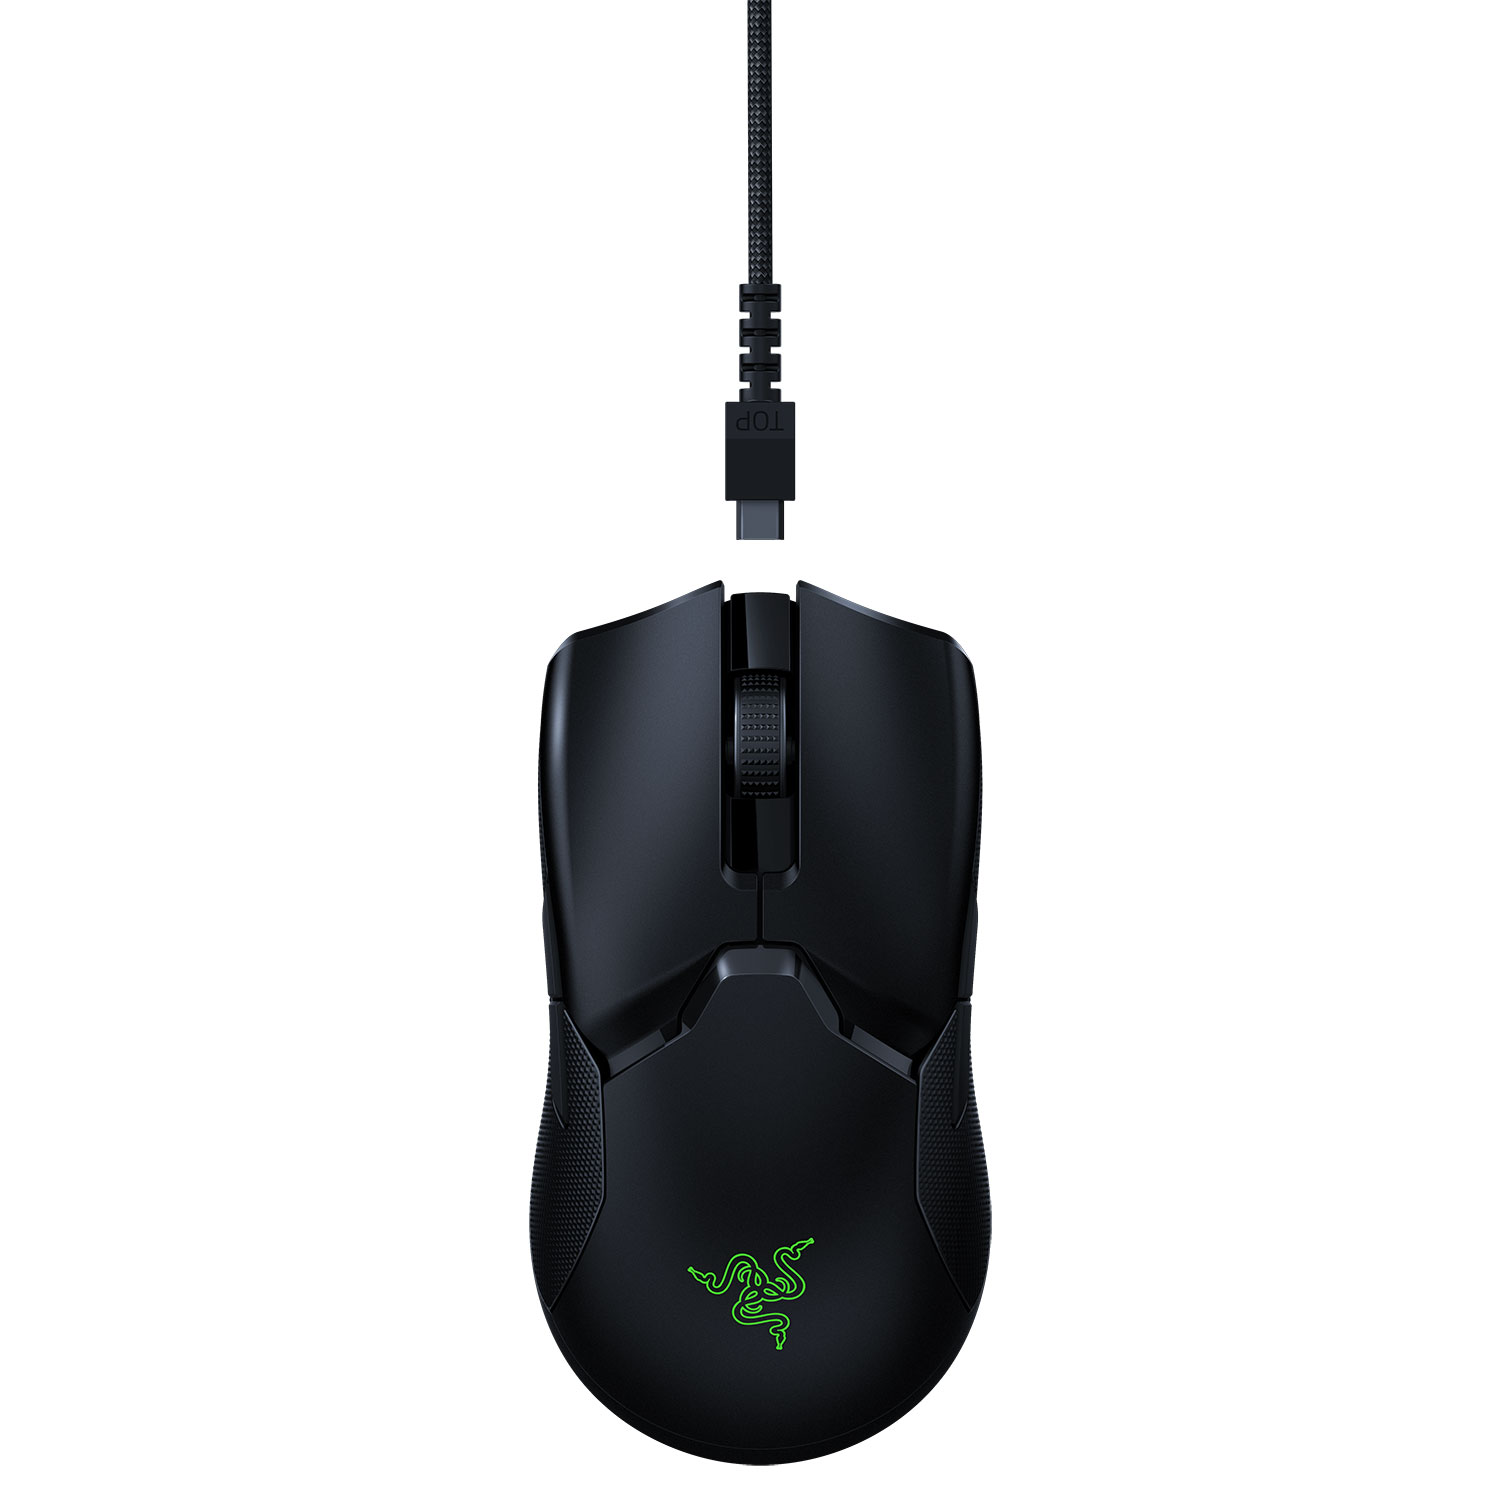 Razer Gaming Mouse Viper Ultimate & Charge Dock | Plaisio